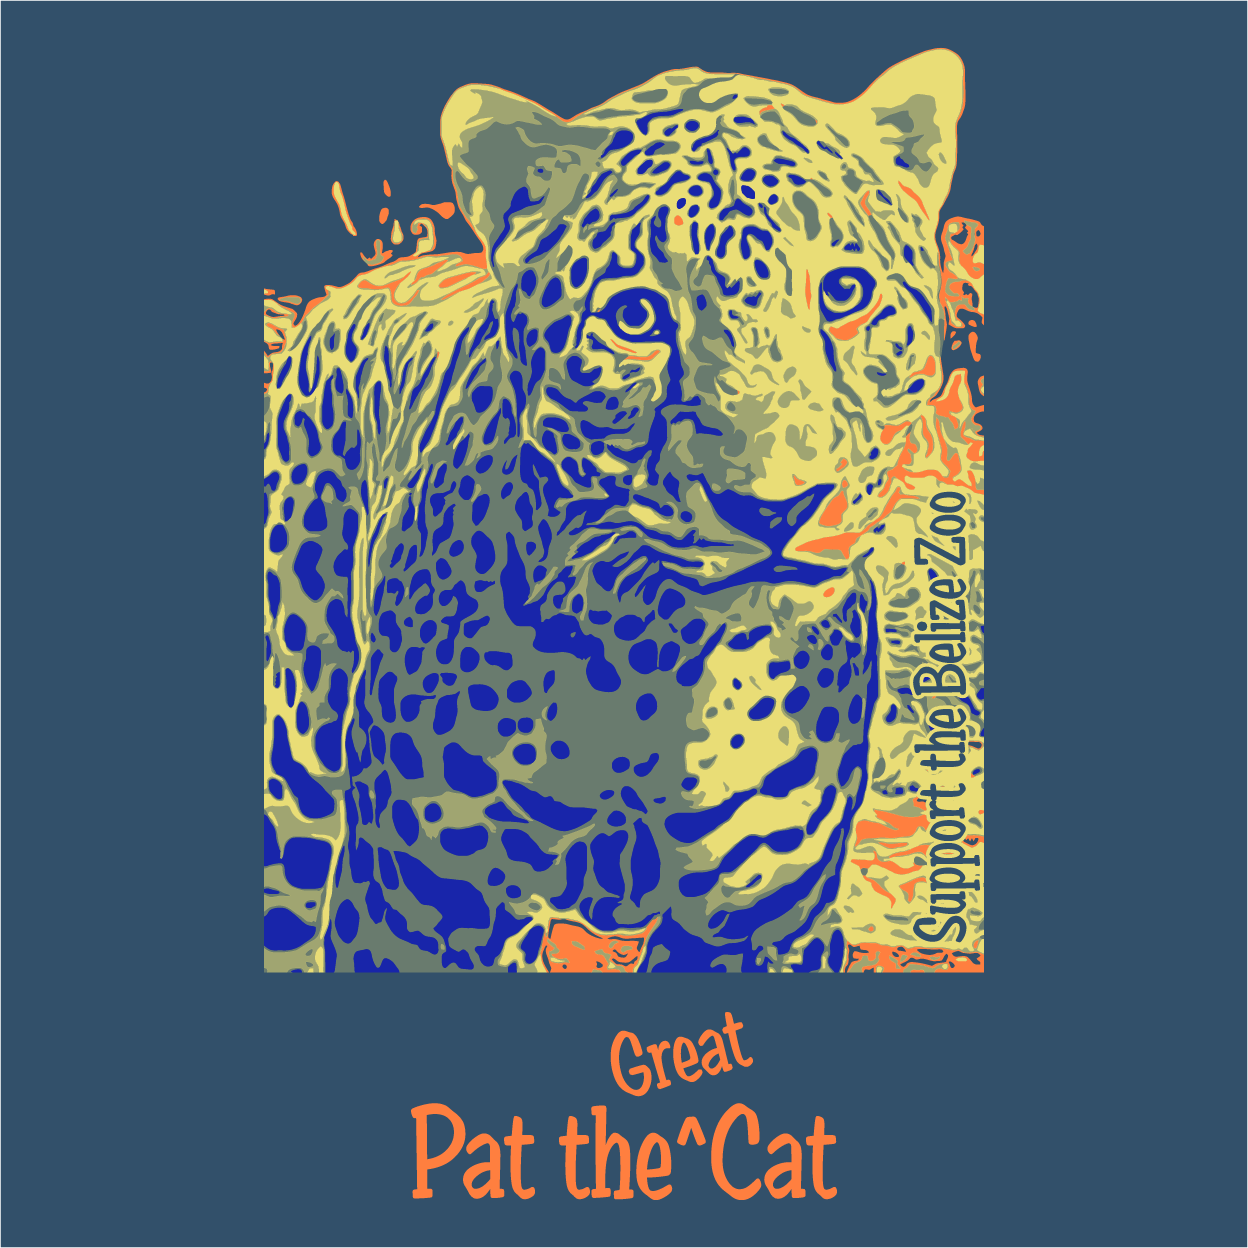 Pat the Great Cat shirt design - zoomed